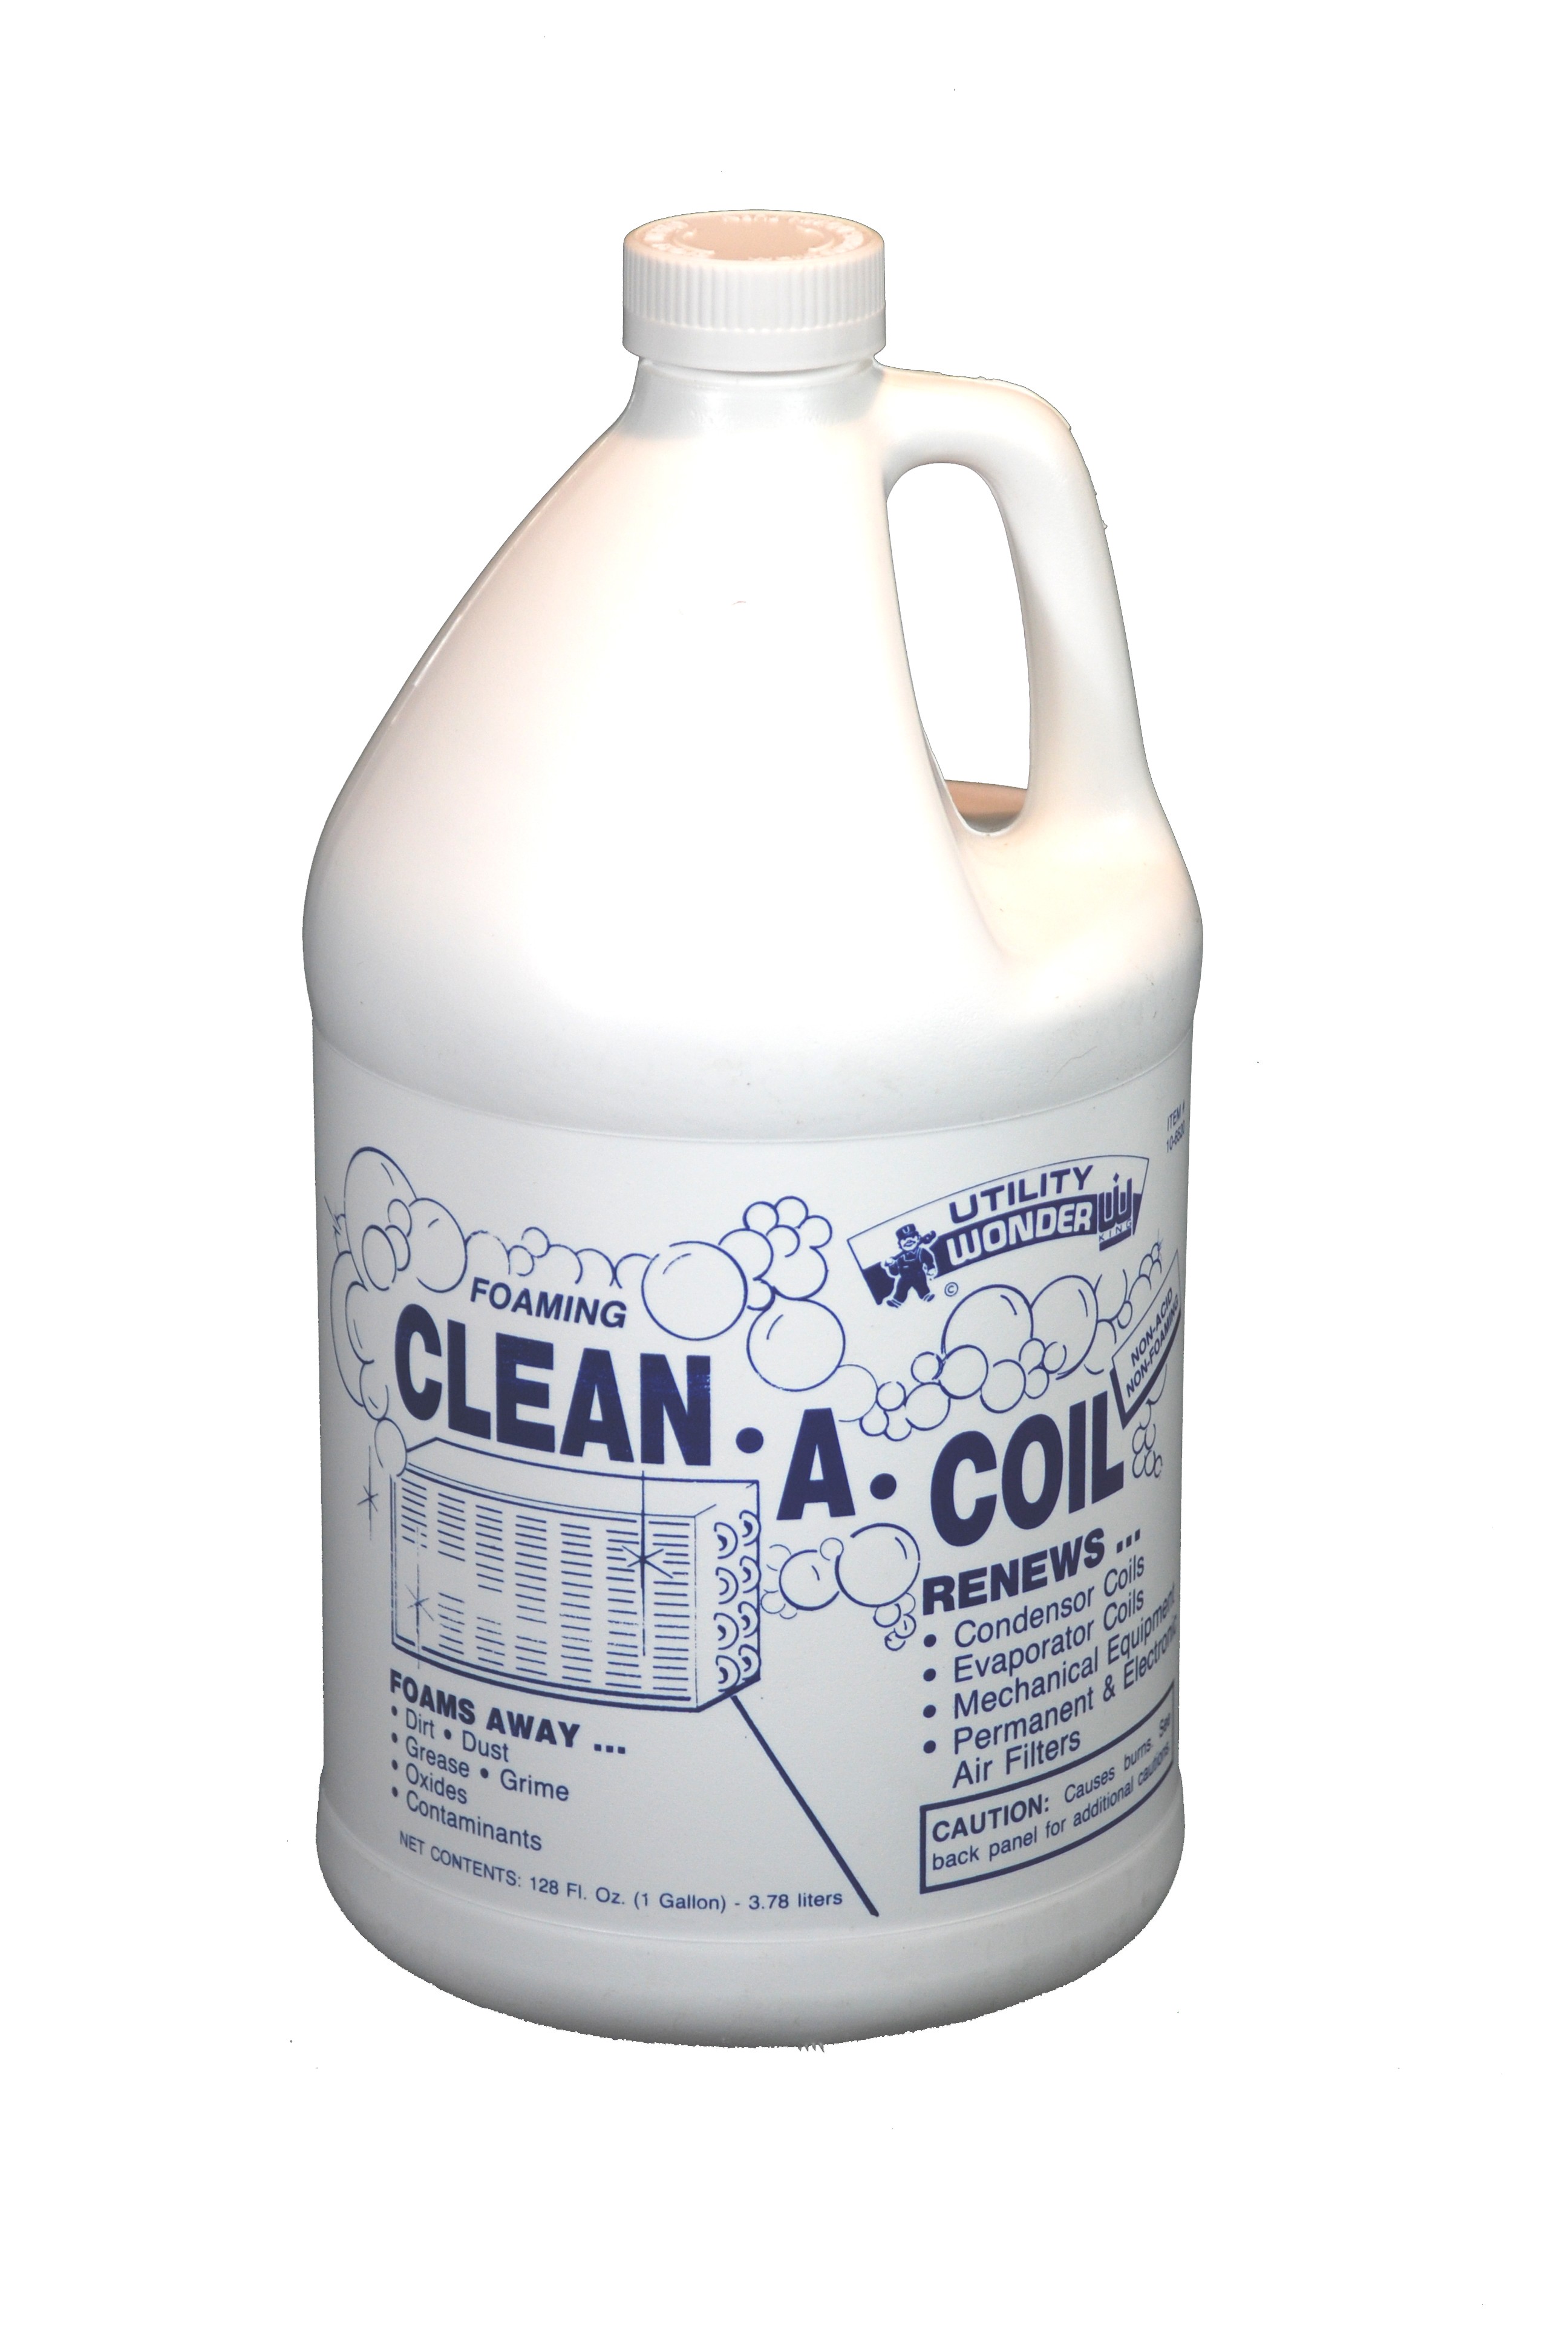 FOAMING CLEAN-A-COIL COIL CLEANER & BRIGHTENER - Products